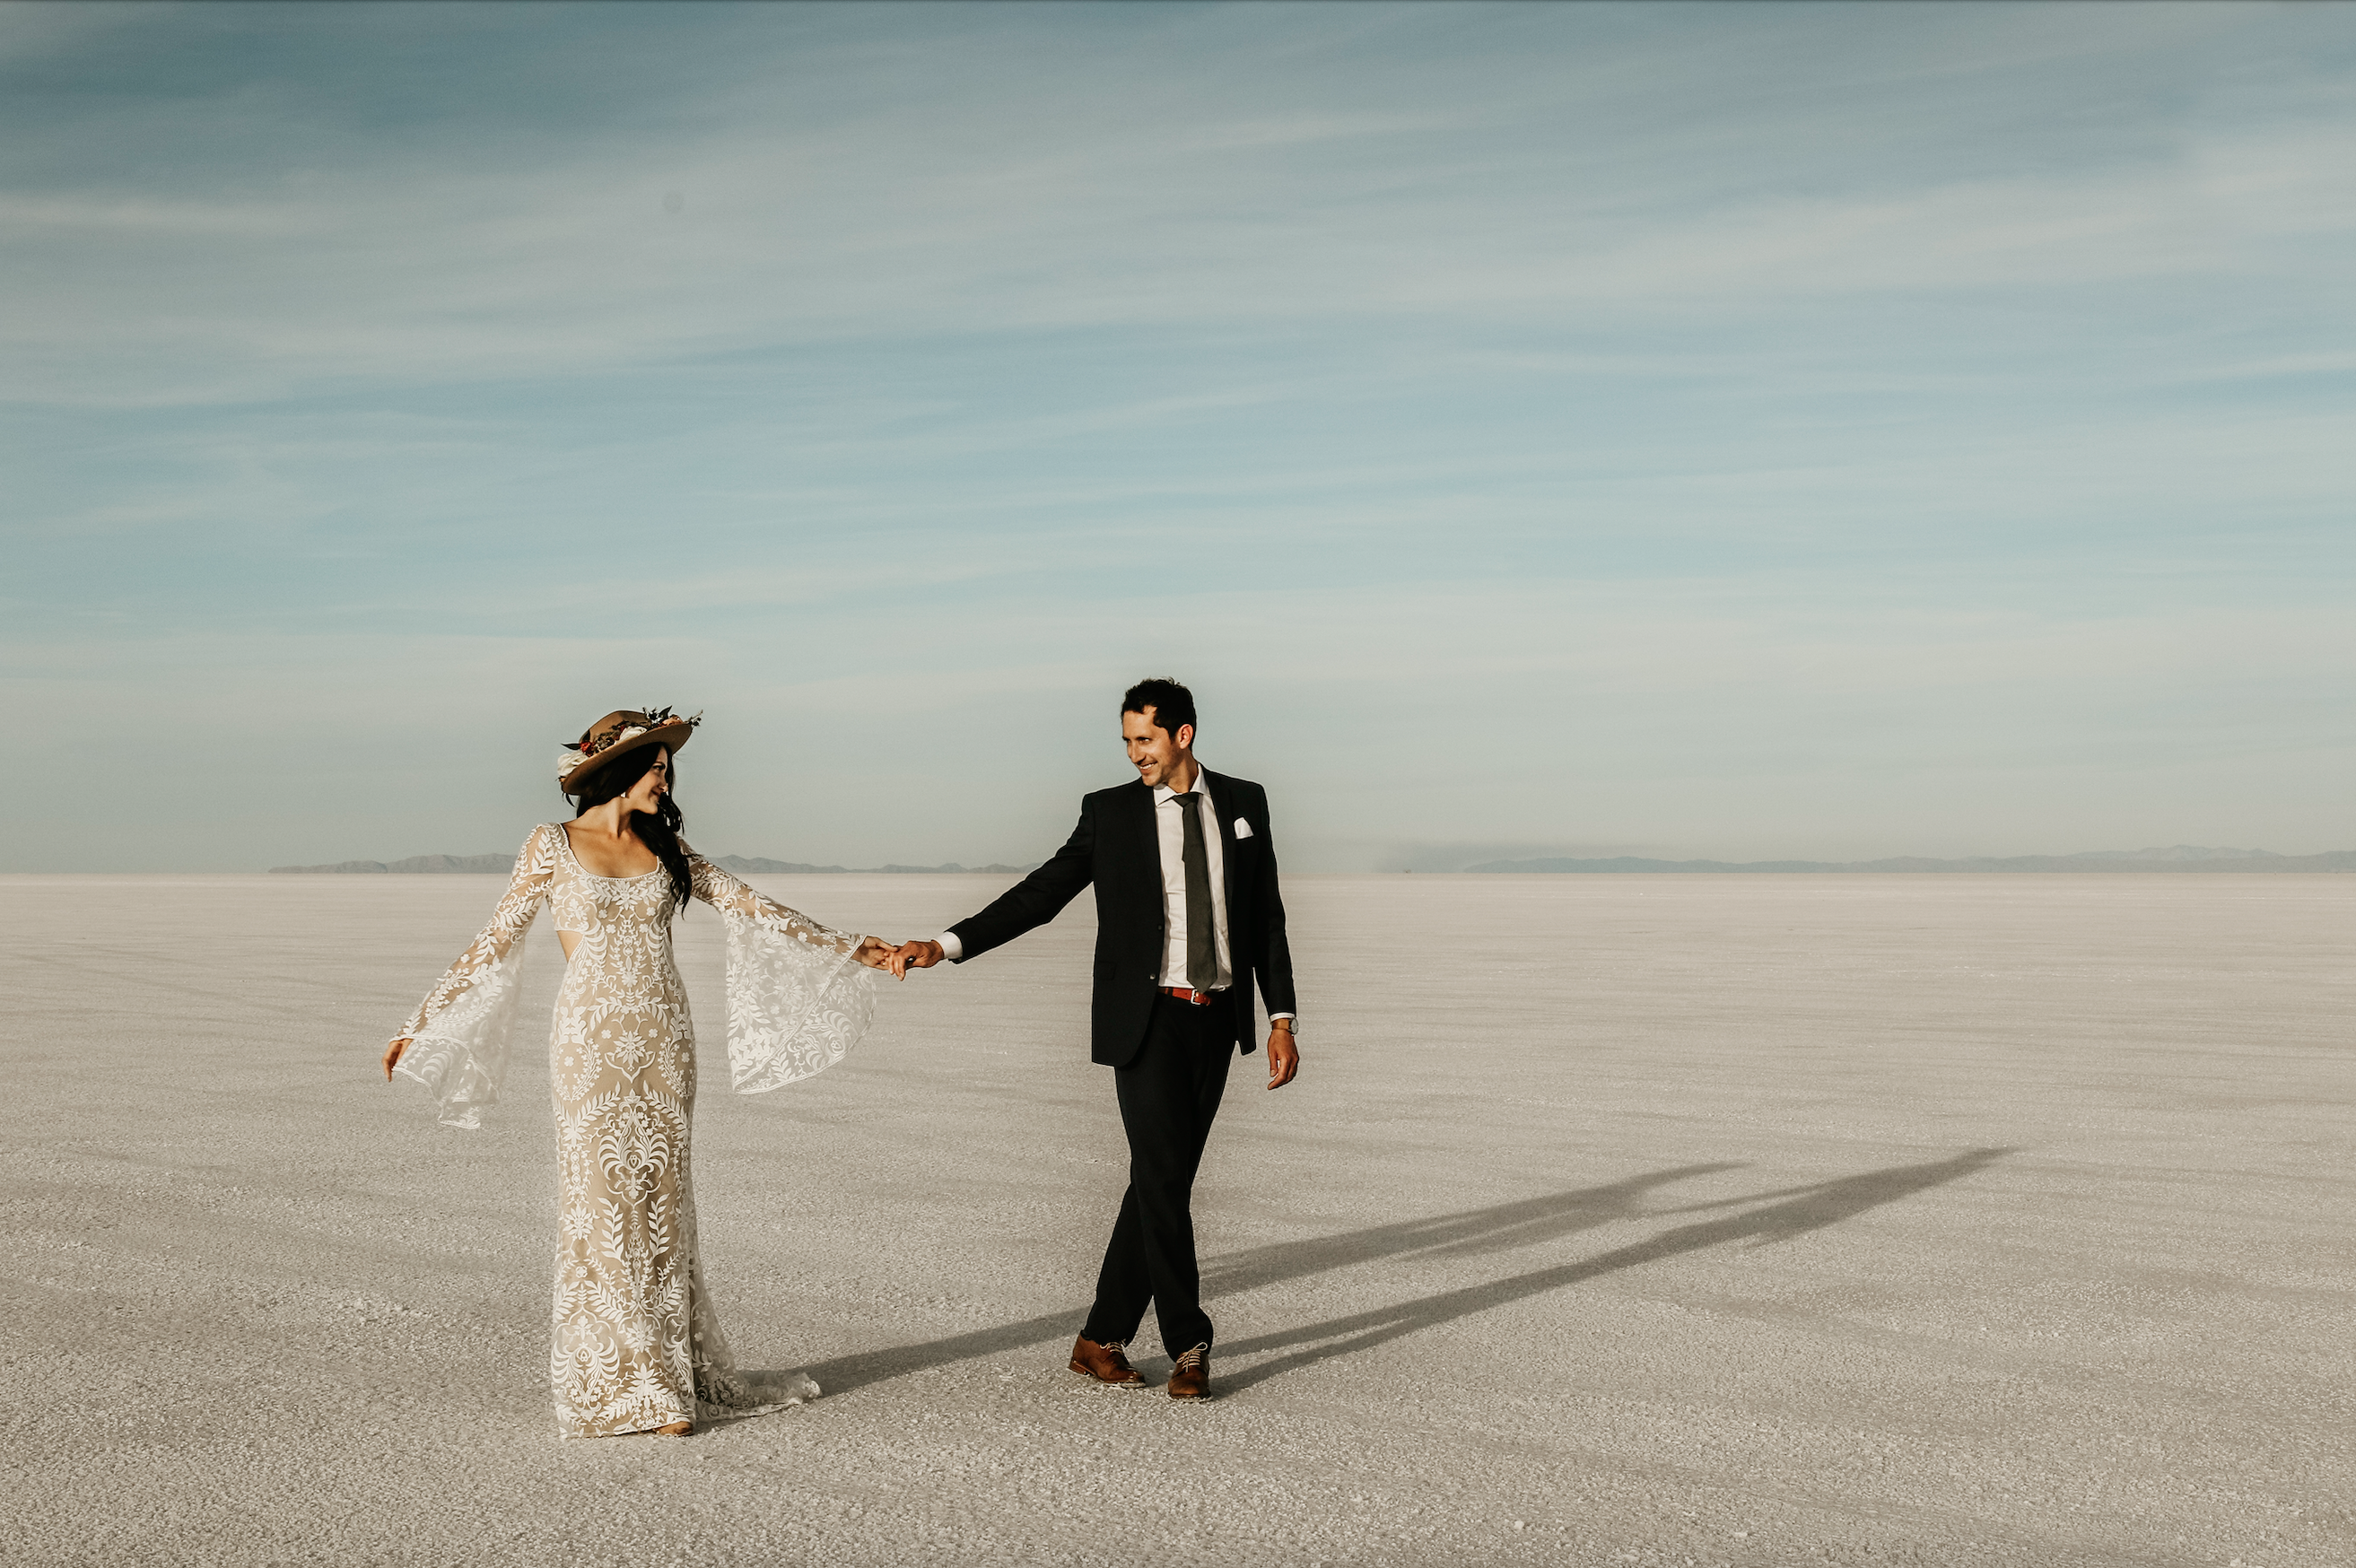 A bride and groom holding hands on the salt flats in Utah, her wearing a designer wedding gown and hat, him in a suit.